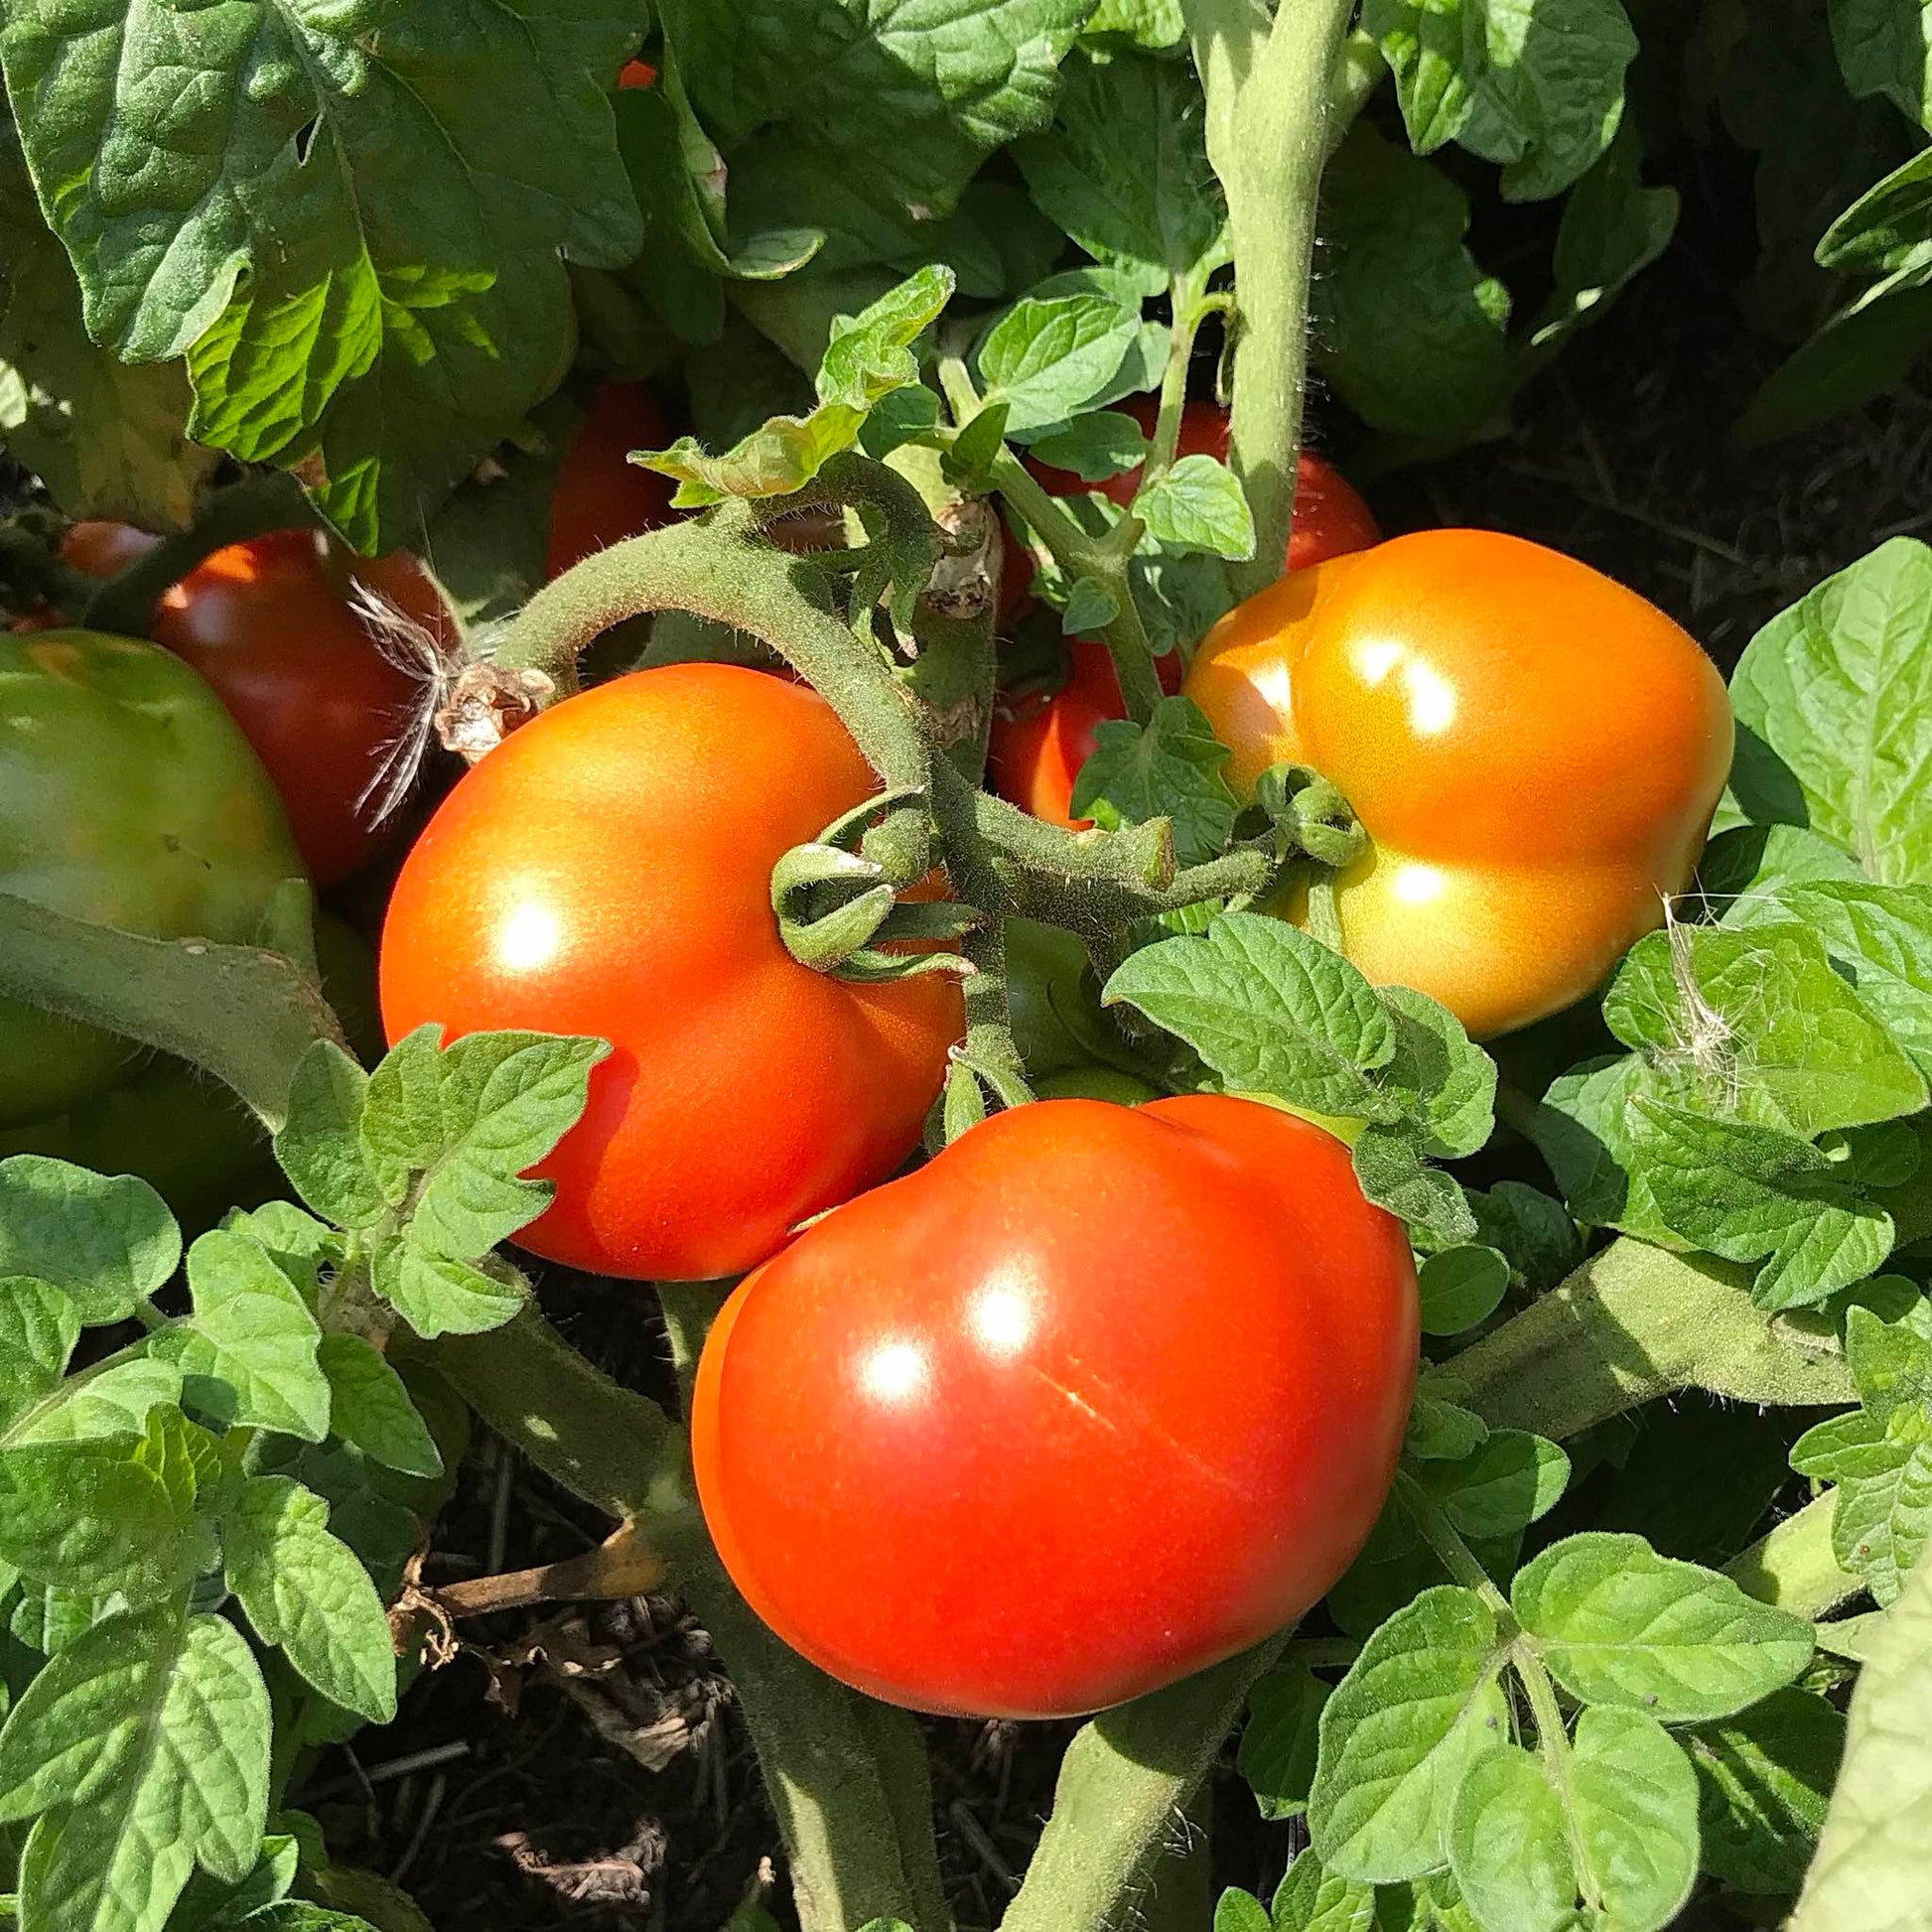 Closeup view of red tomatoes on a plant.